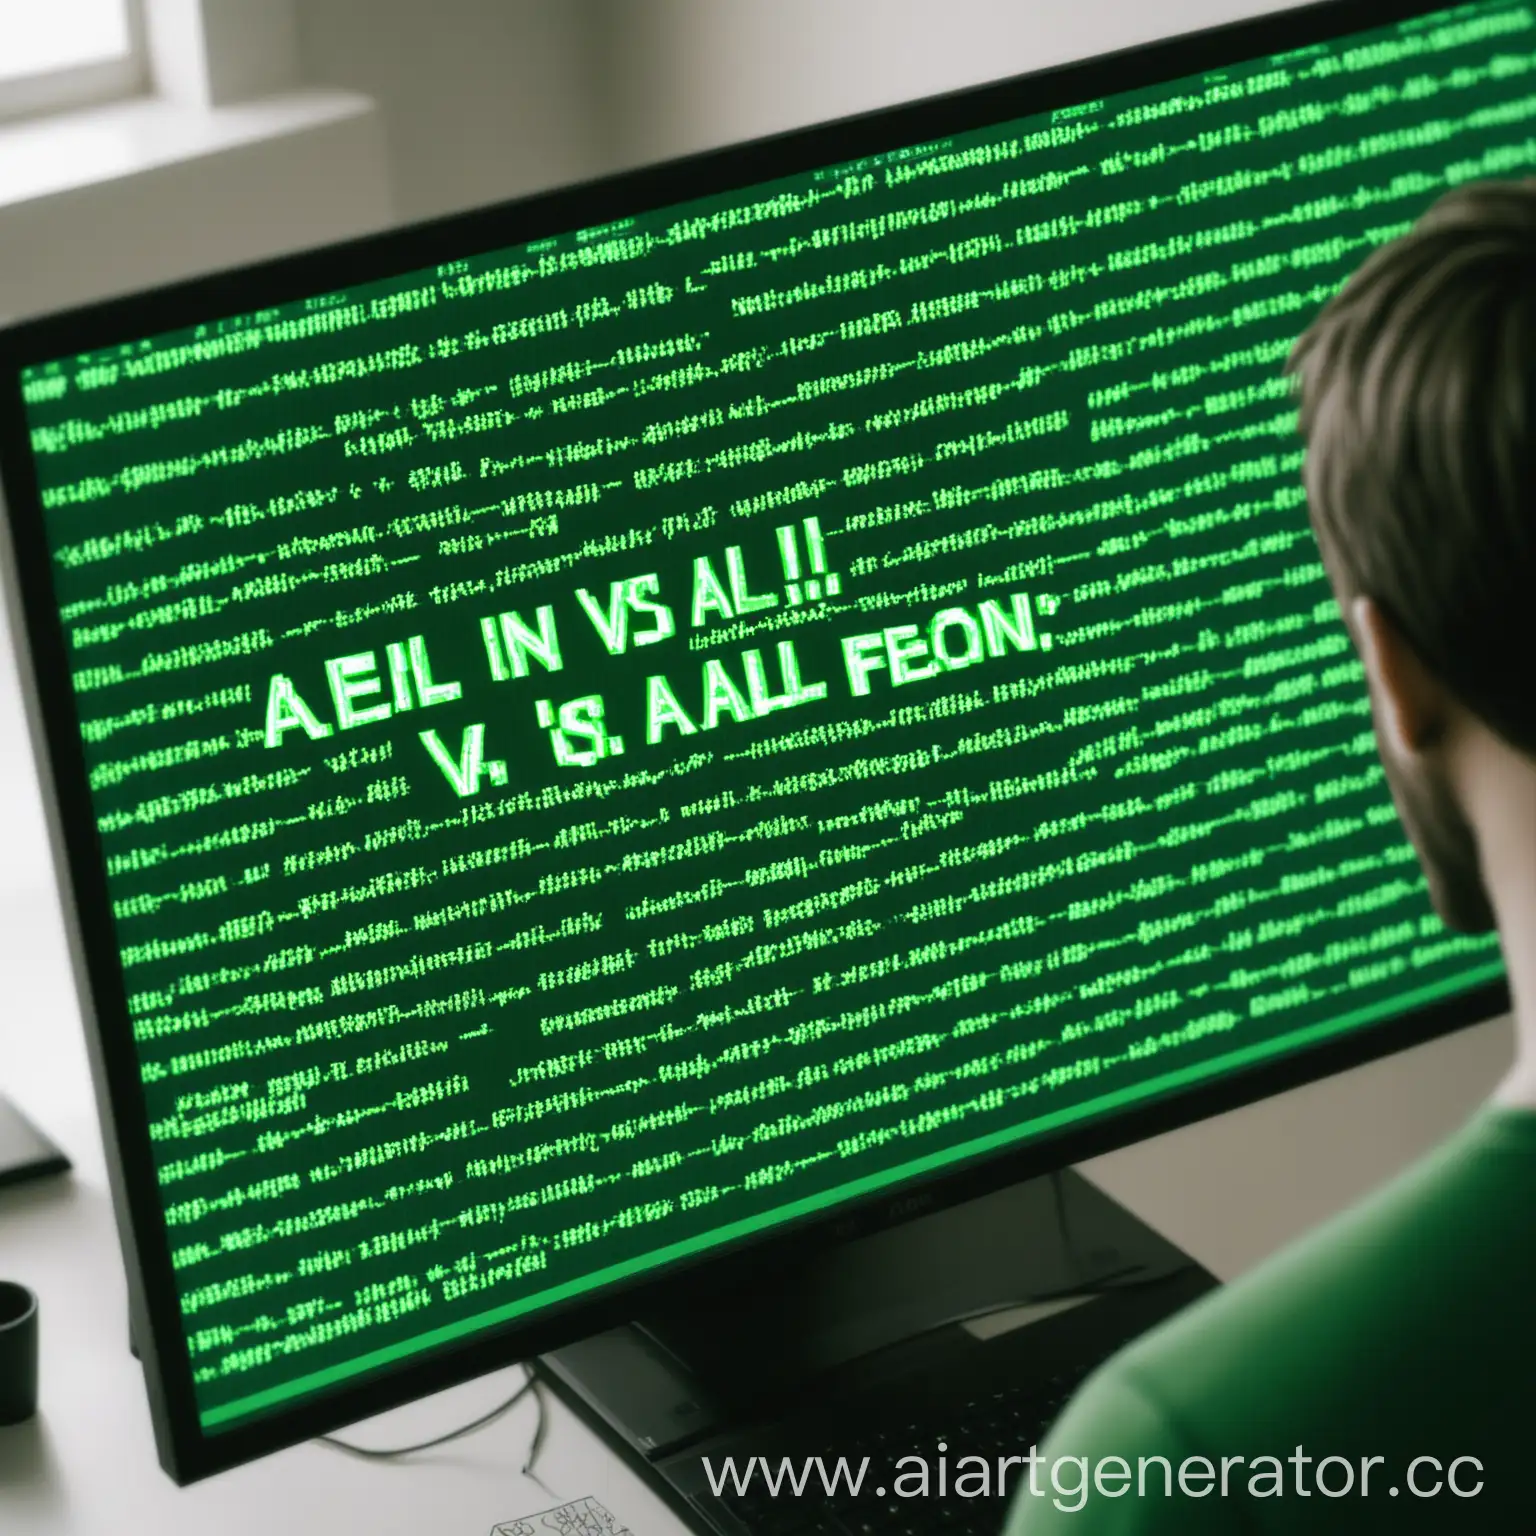 Computer-Screen-Displaying-VS-All-in-Vibrant-Green-Color-with-Nearby-Person